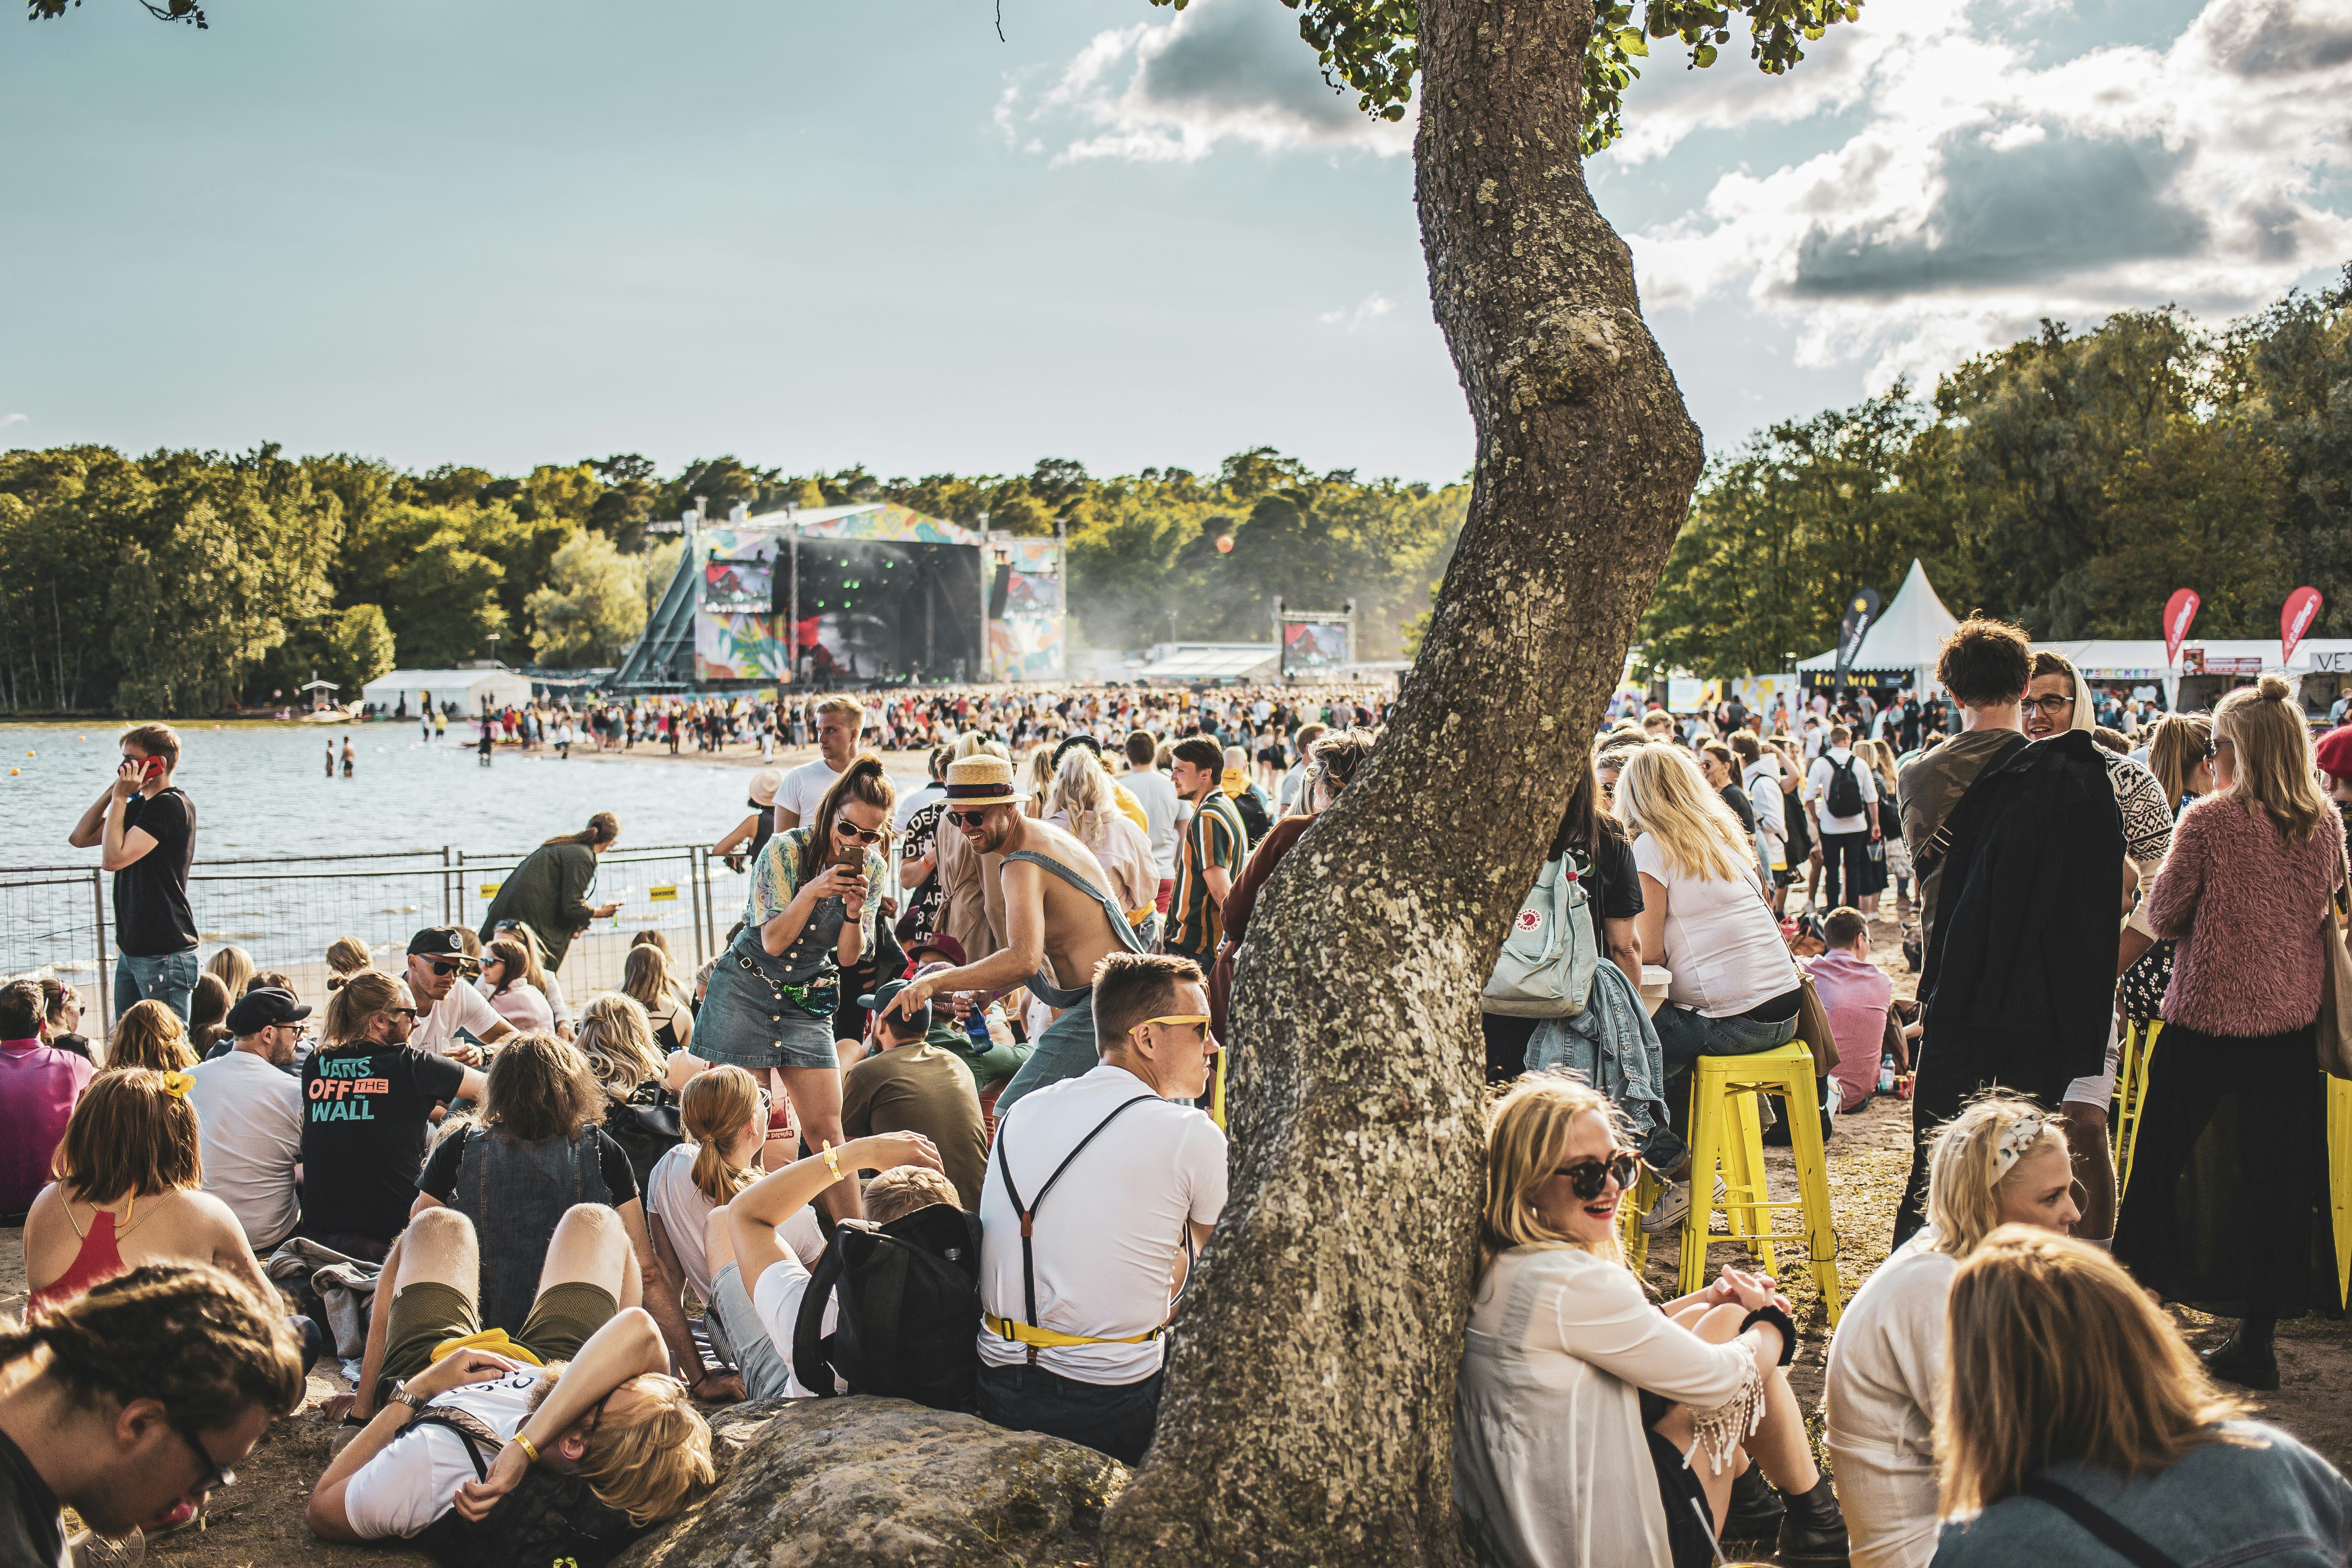 A large crowd of people lounge around in the sunshine at the Ruisrock festival on Ruissalo Island.